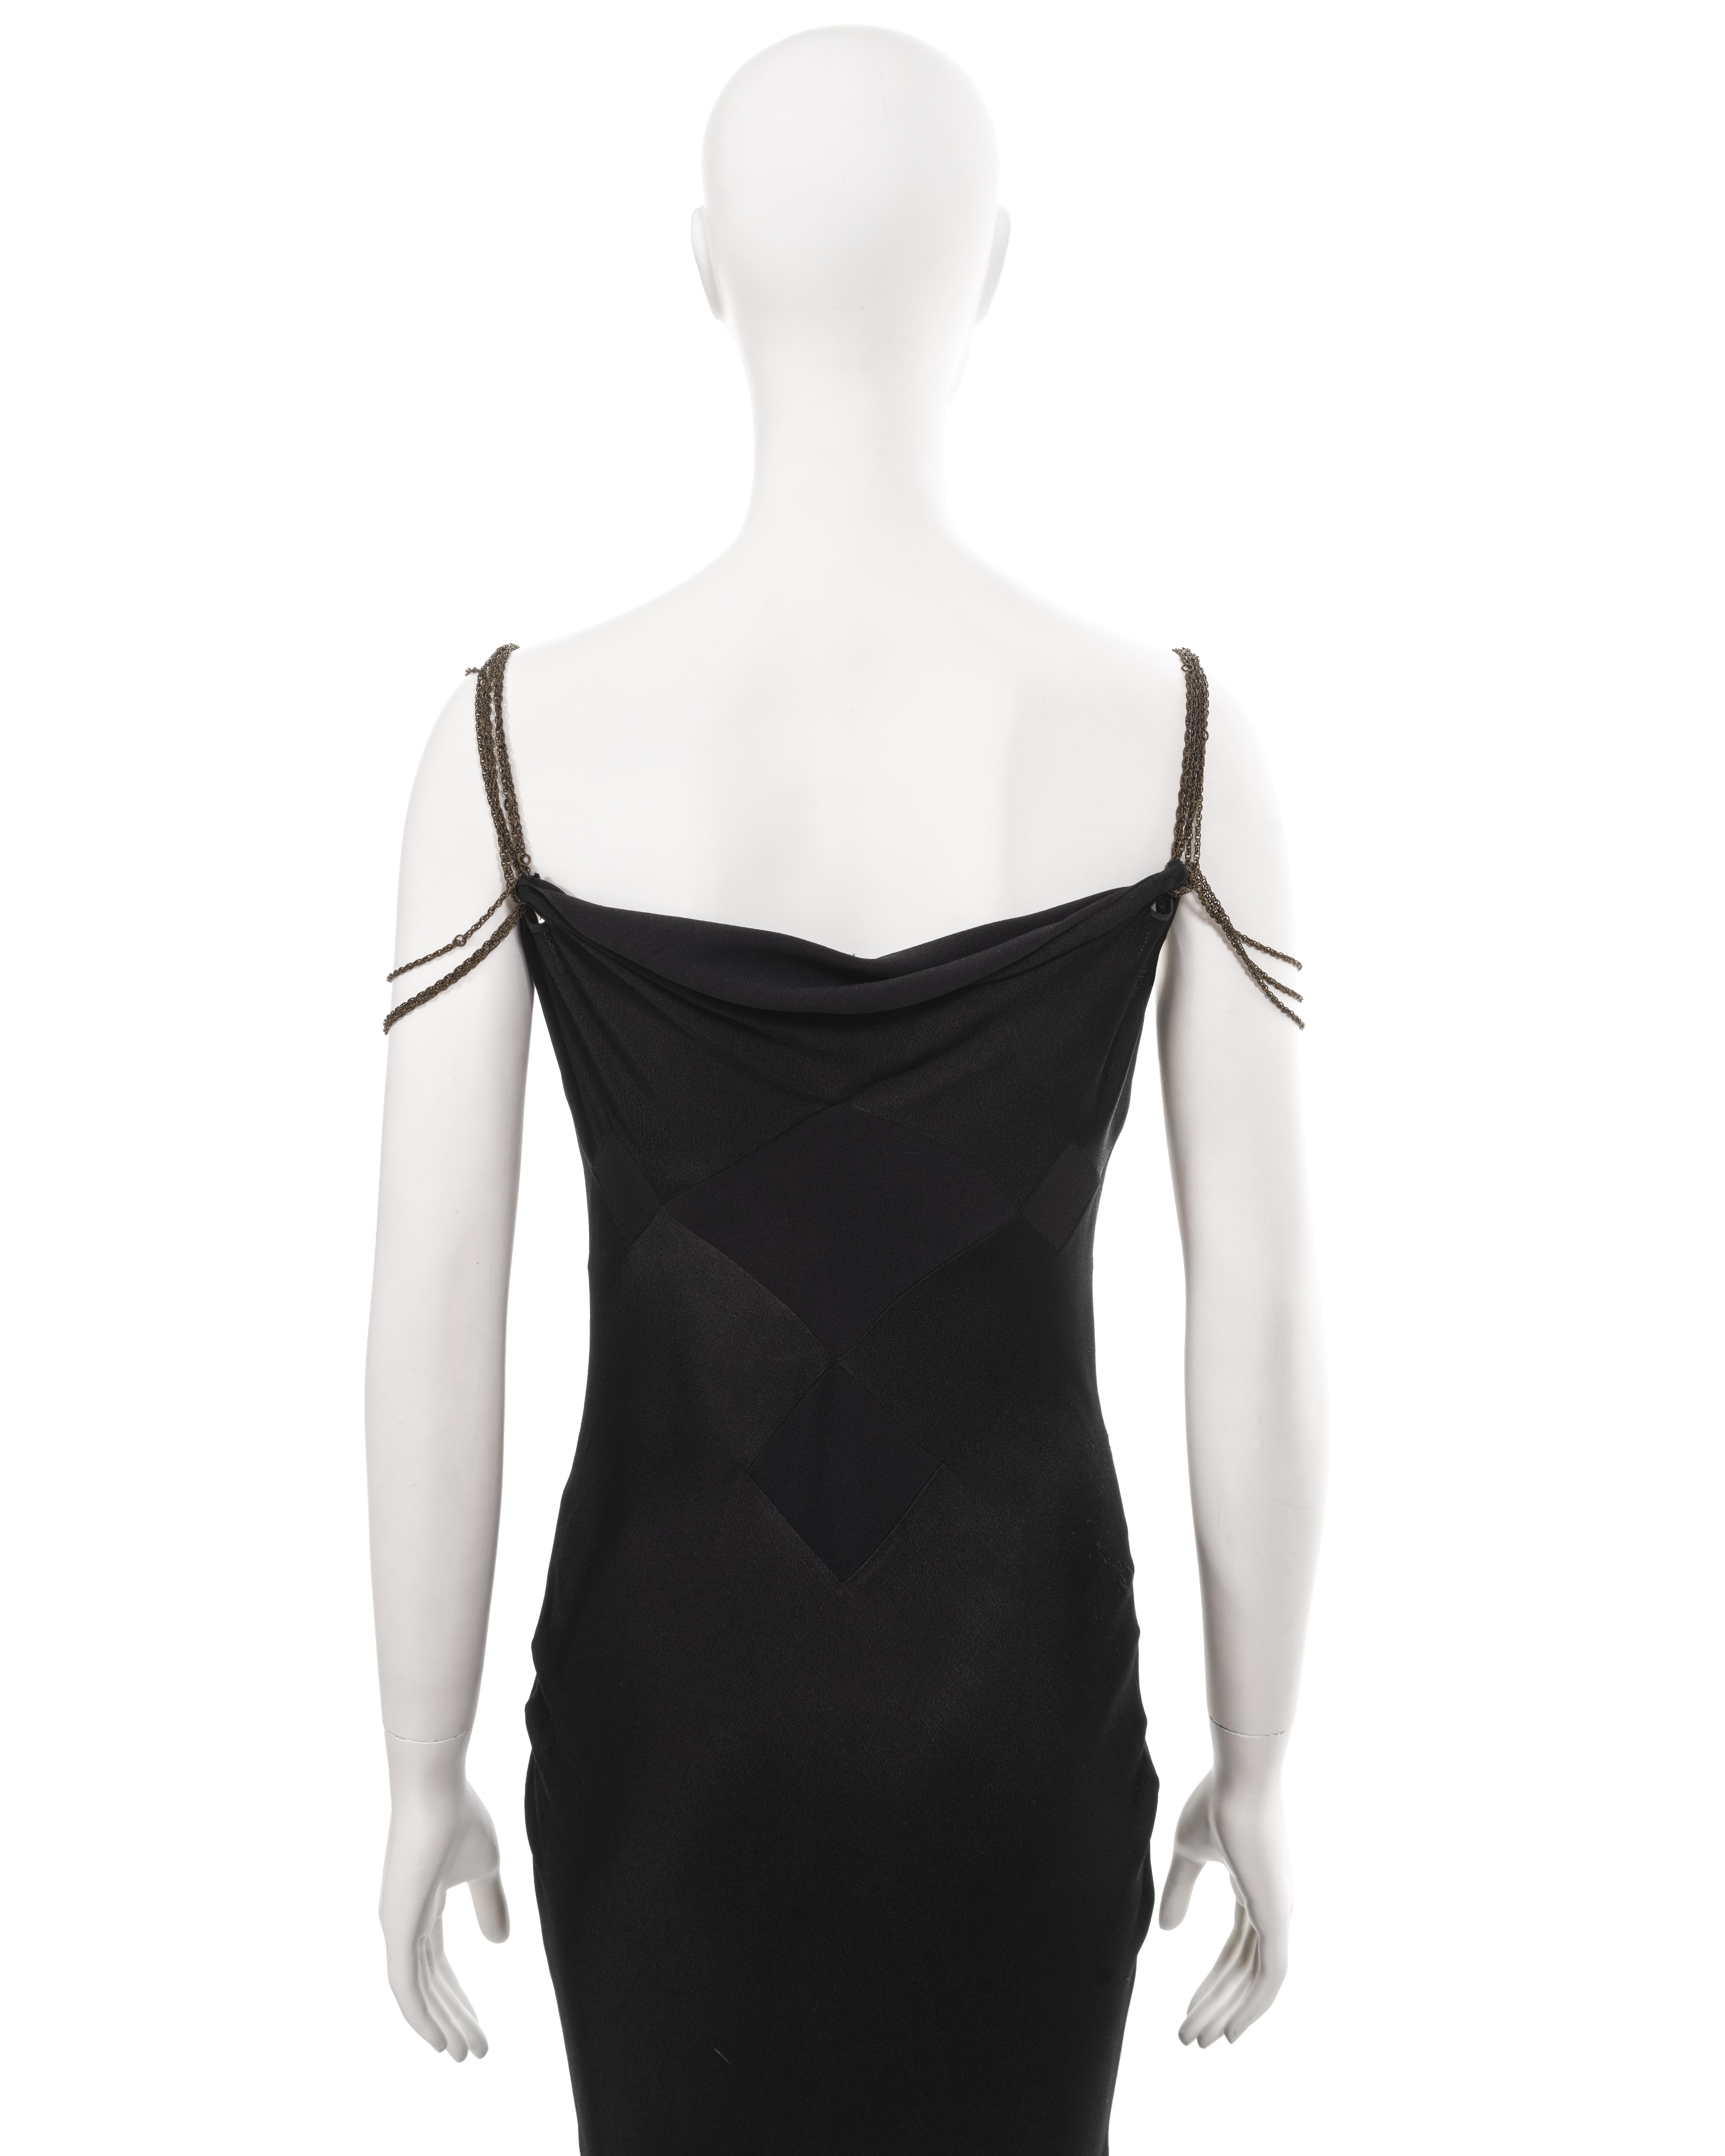 John Galliano black bias-cut satin evening dress with chain straps, ss 2002 For Sale 7